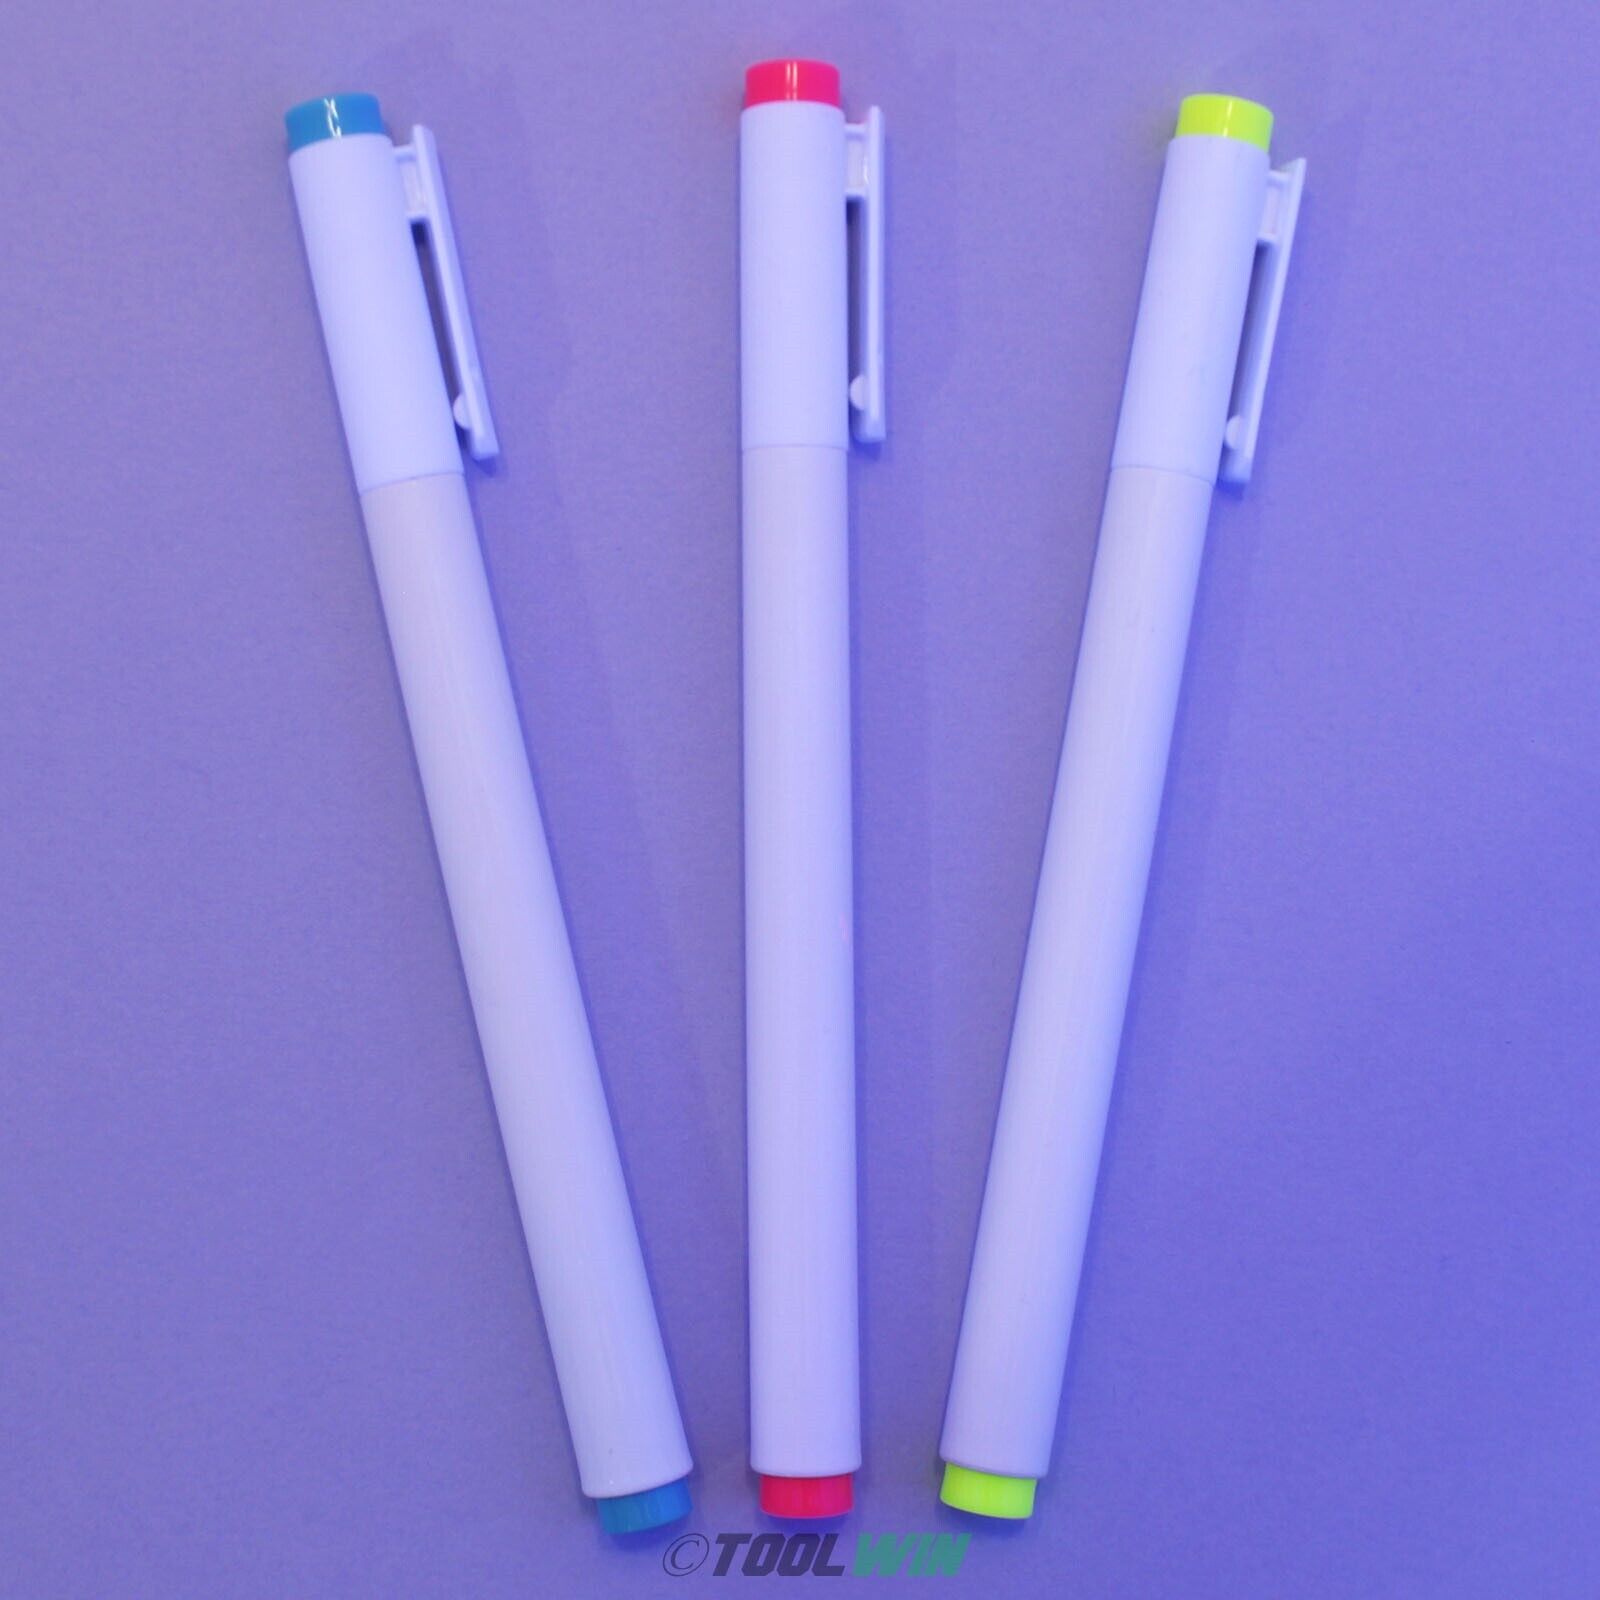 3 pc Invisible UV Ink Marker Pen Blue Red Yellow Black Light Reactive New